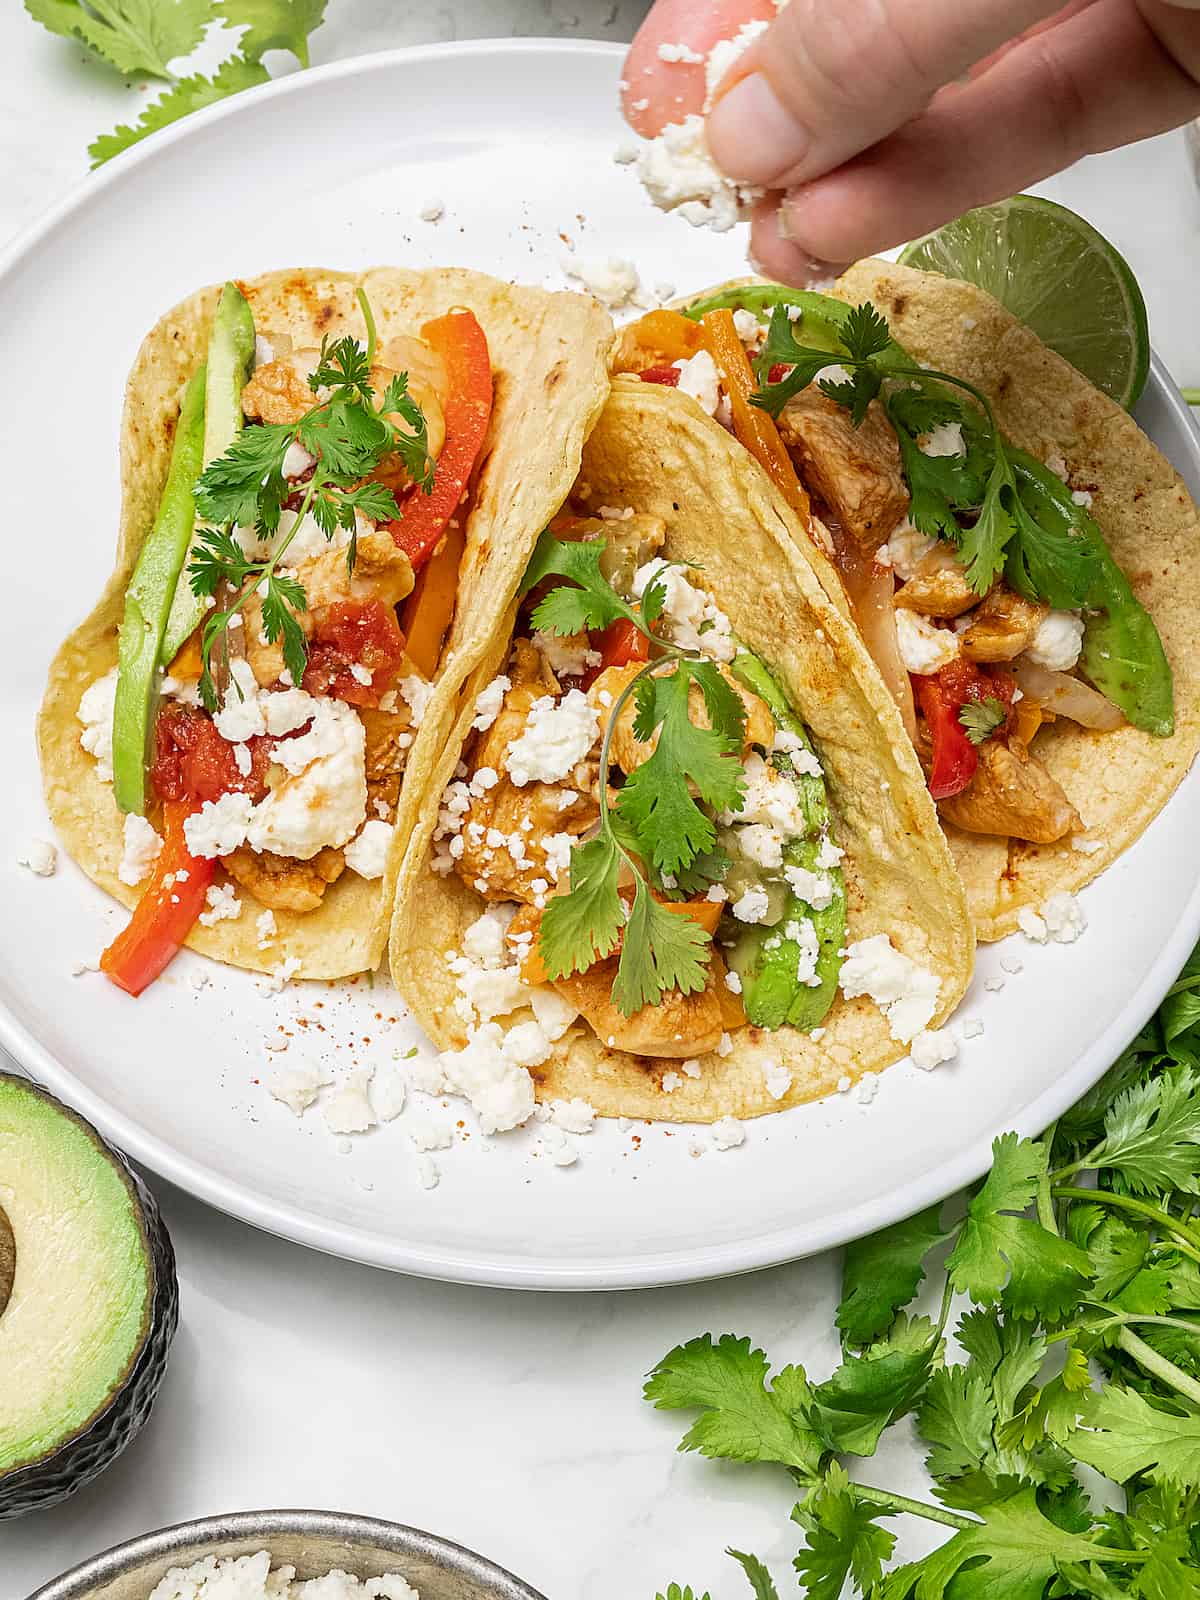 Chicken fajitas on plate, with hand sprinkling queso fresco on top